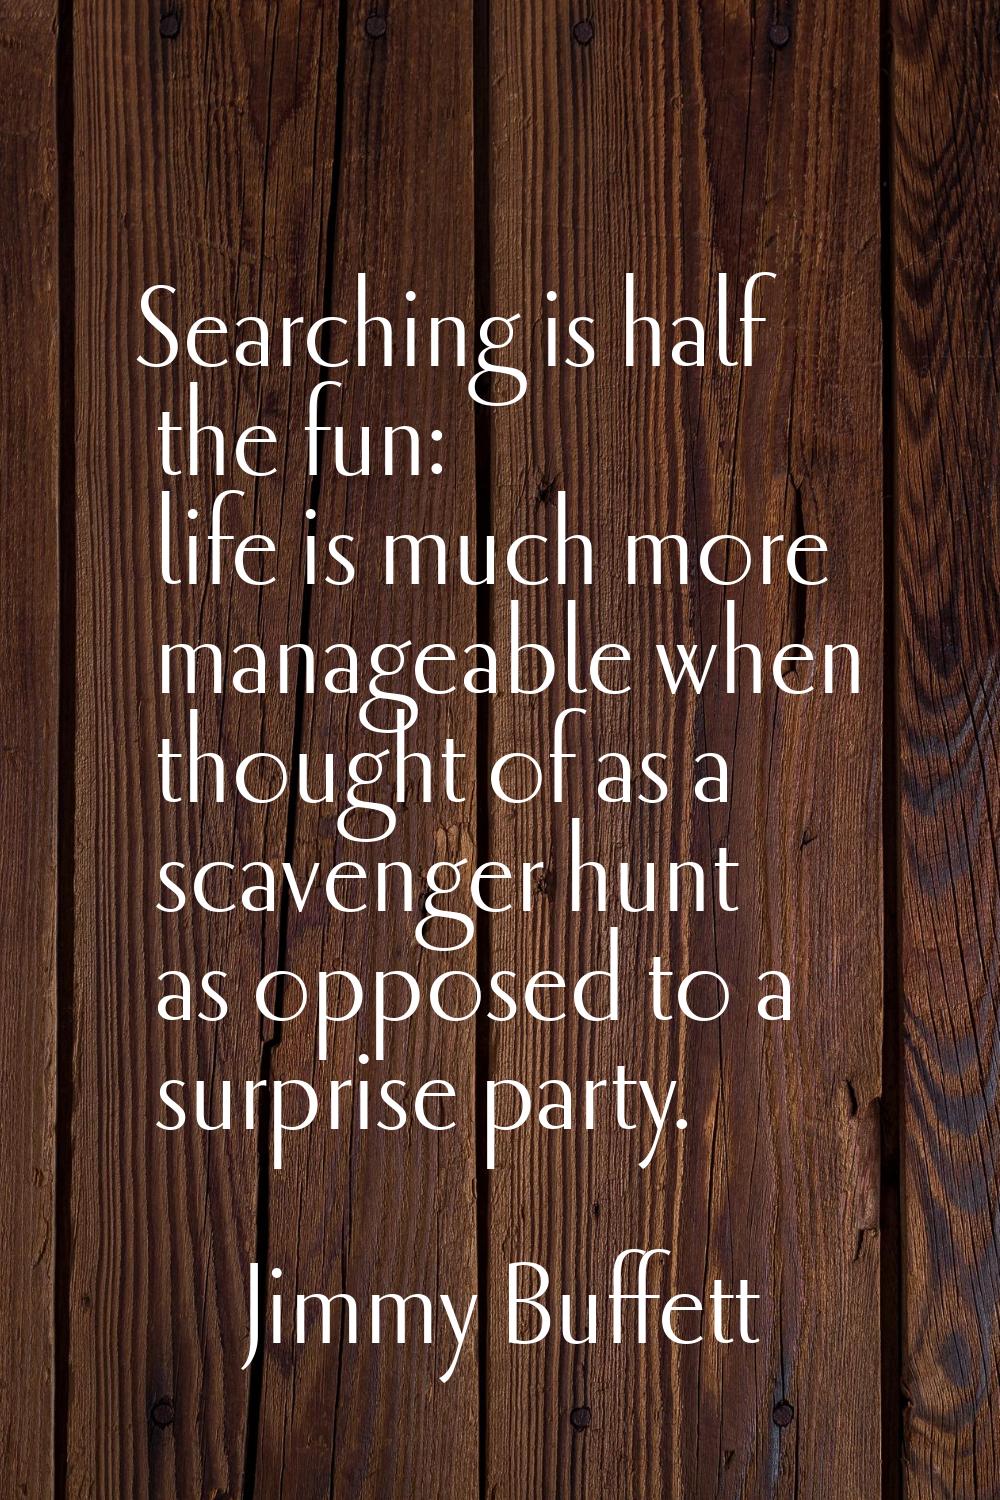 Searching is half the fun: life is much more manageable when thought of as a scavenger hunt as oppo